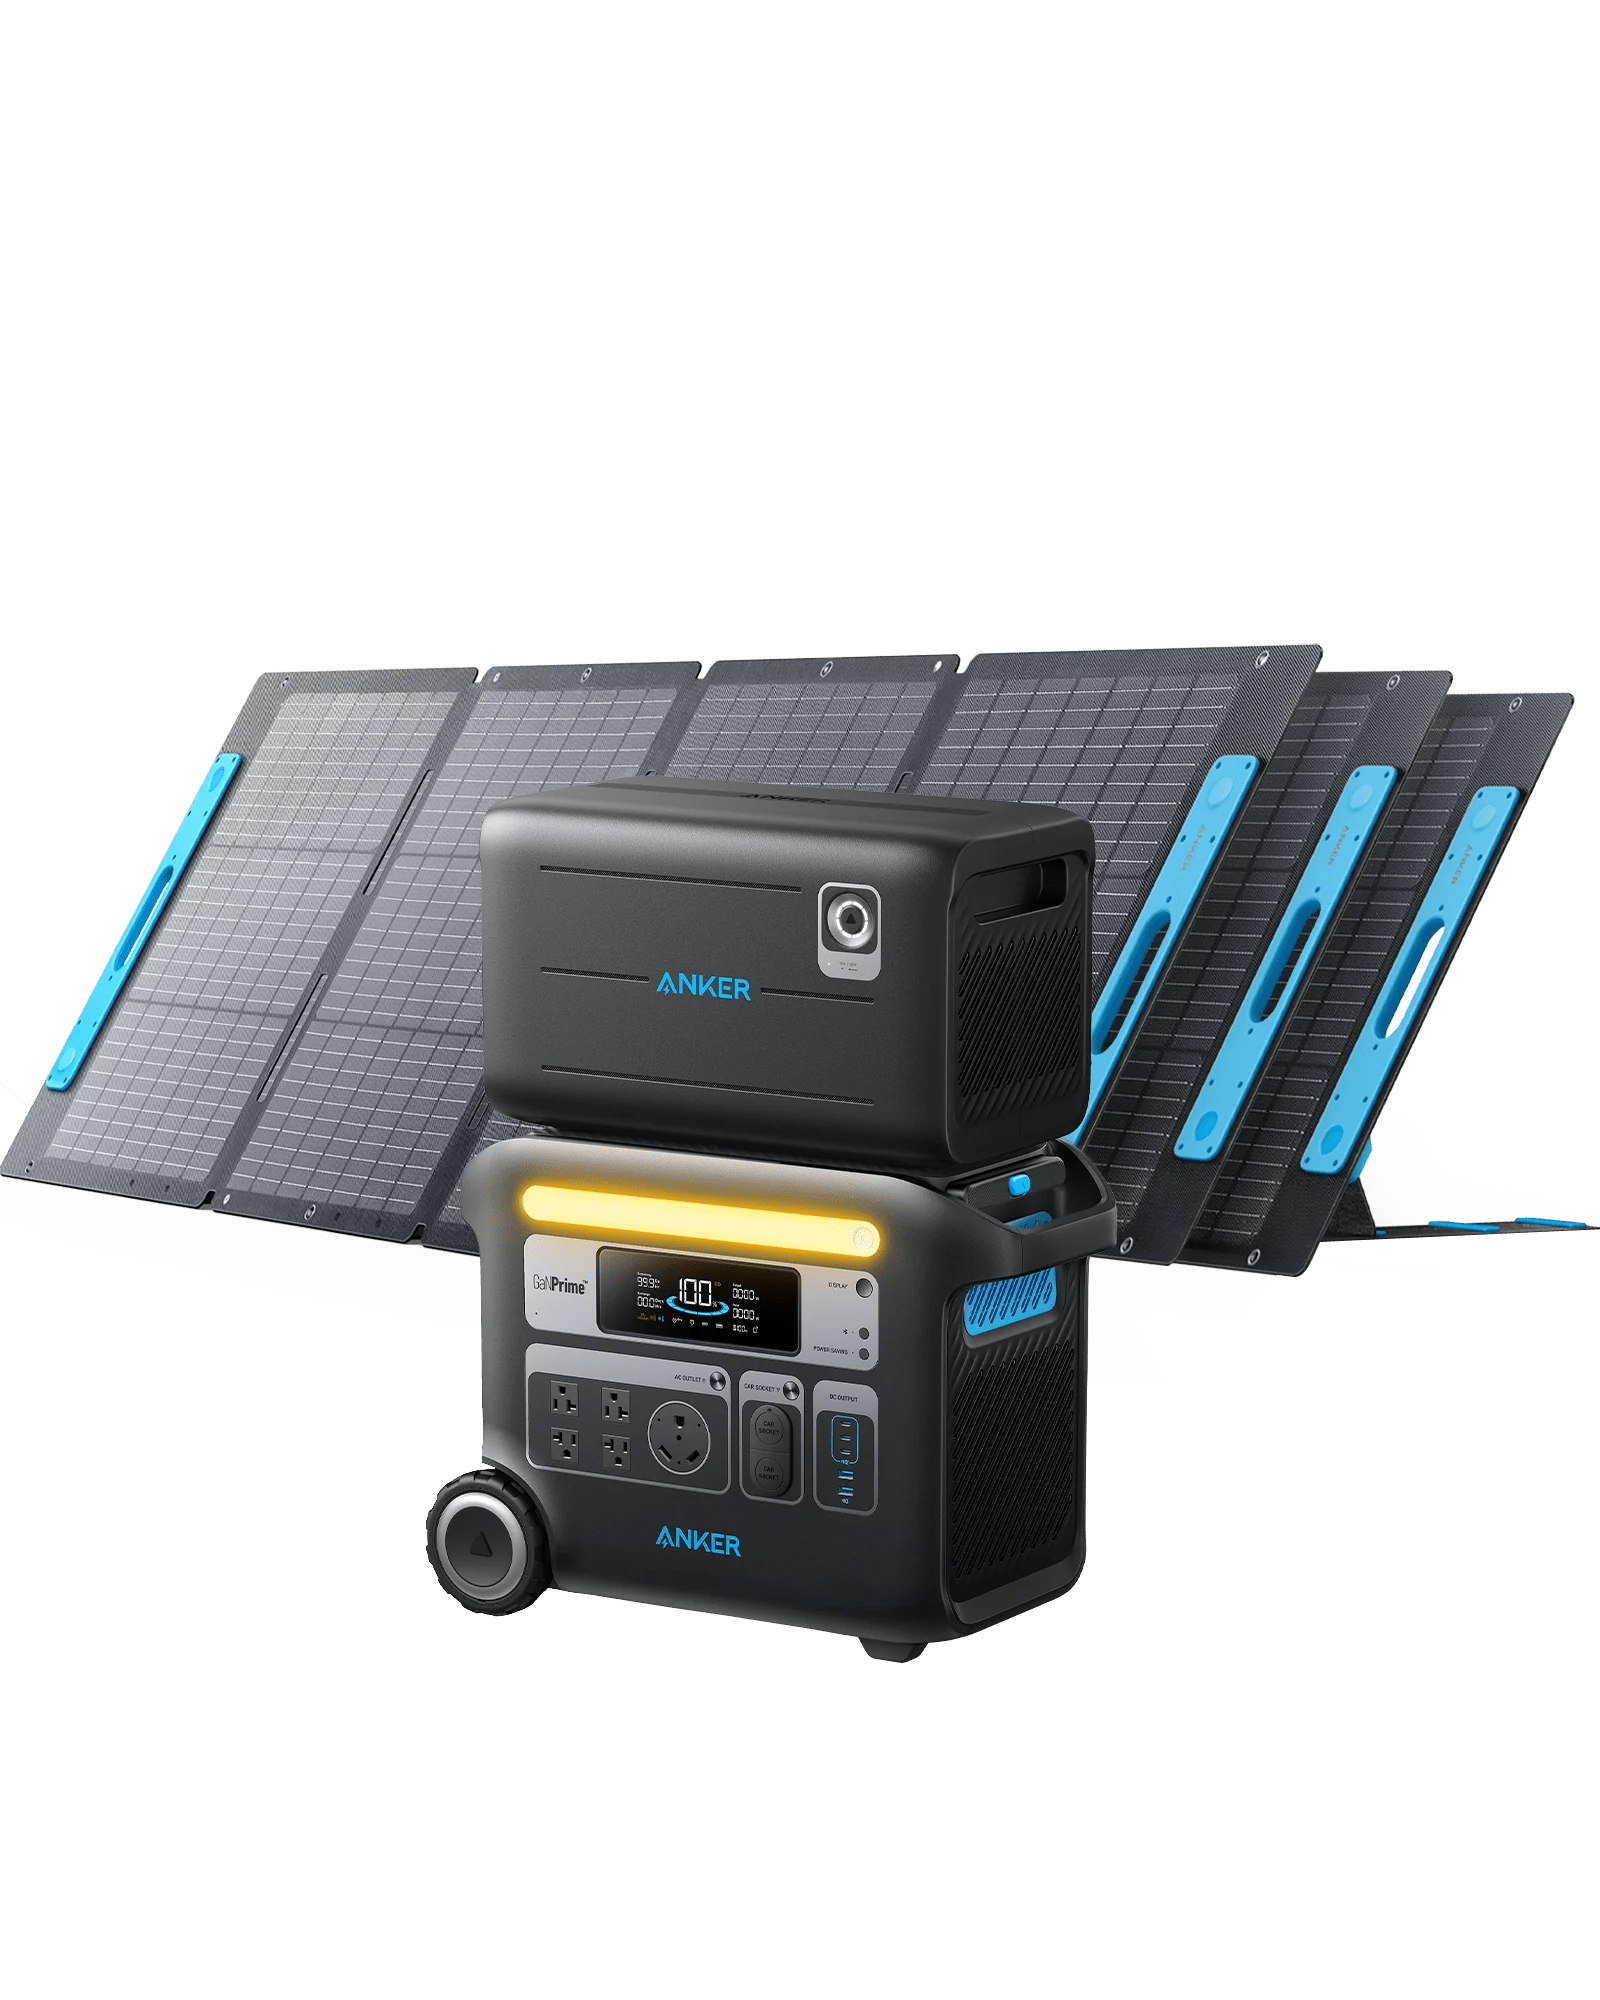 Anker SOLIX F2000 Solar Generator (Solar Generator 767 with 3x 200W Solar Panel and Expansion Battery)